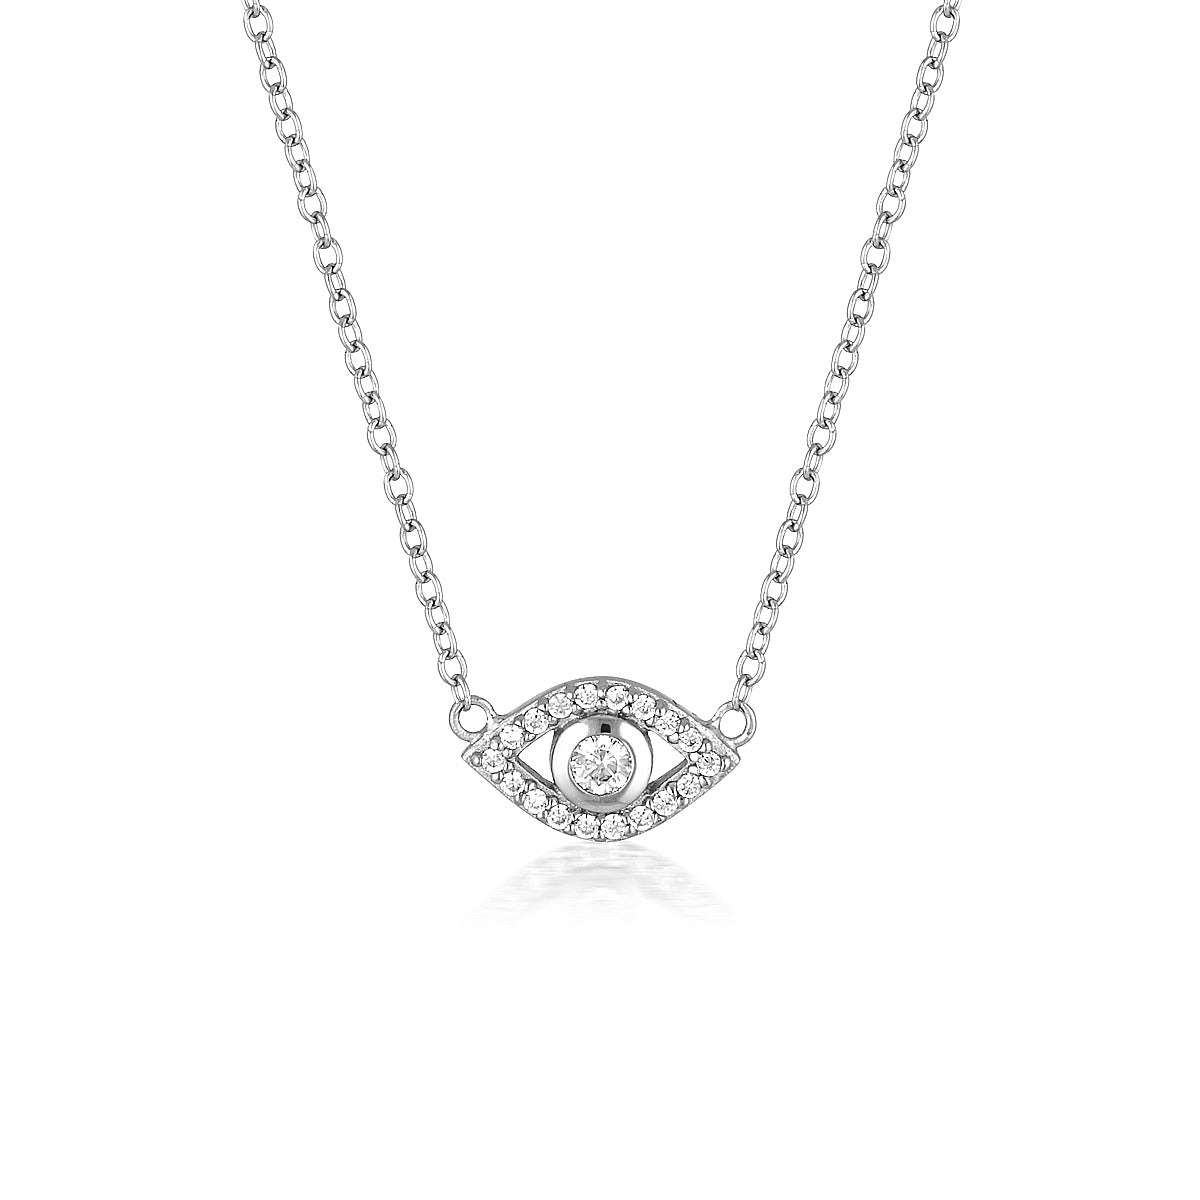 ecommerce image for sterling silver evil necklace necklace with cz stones